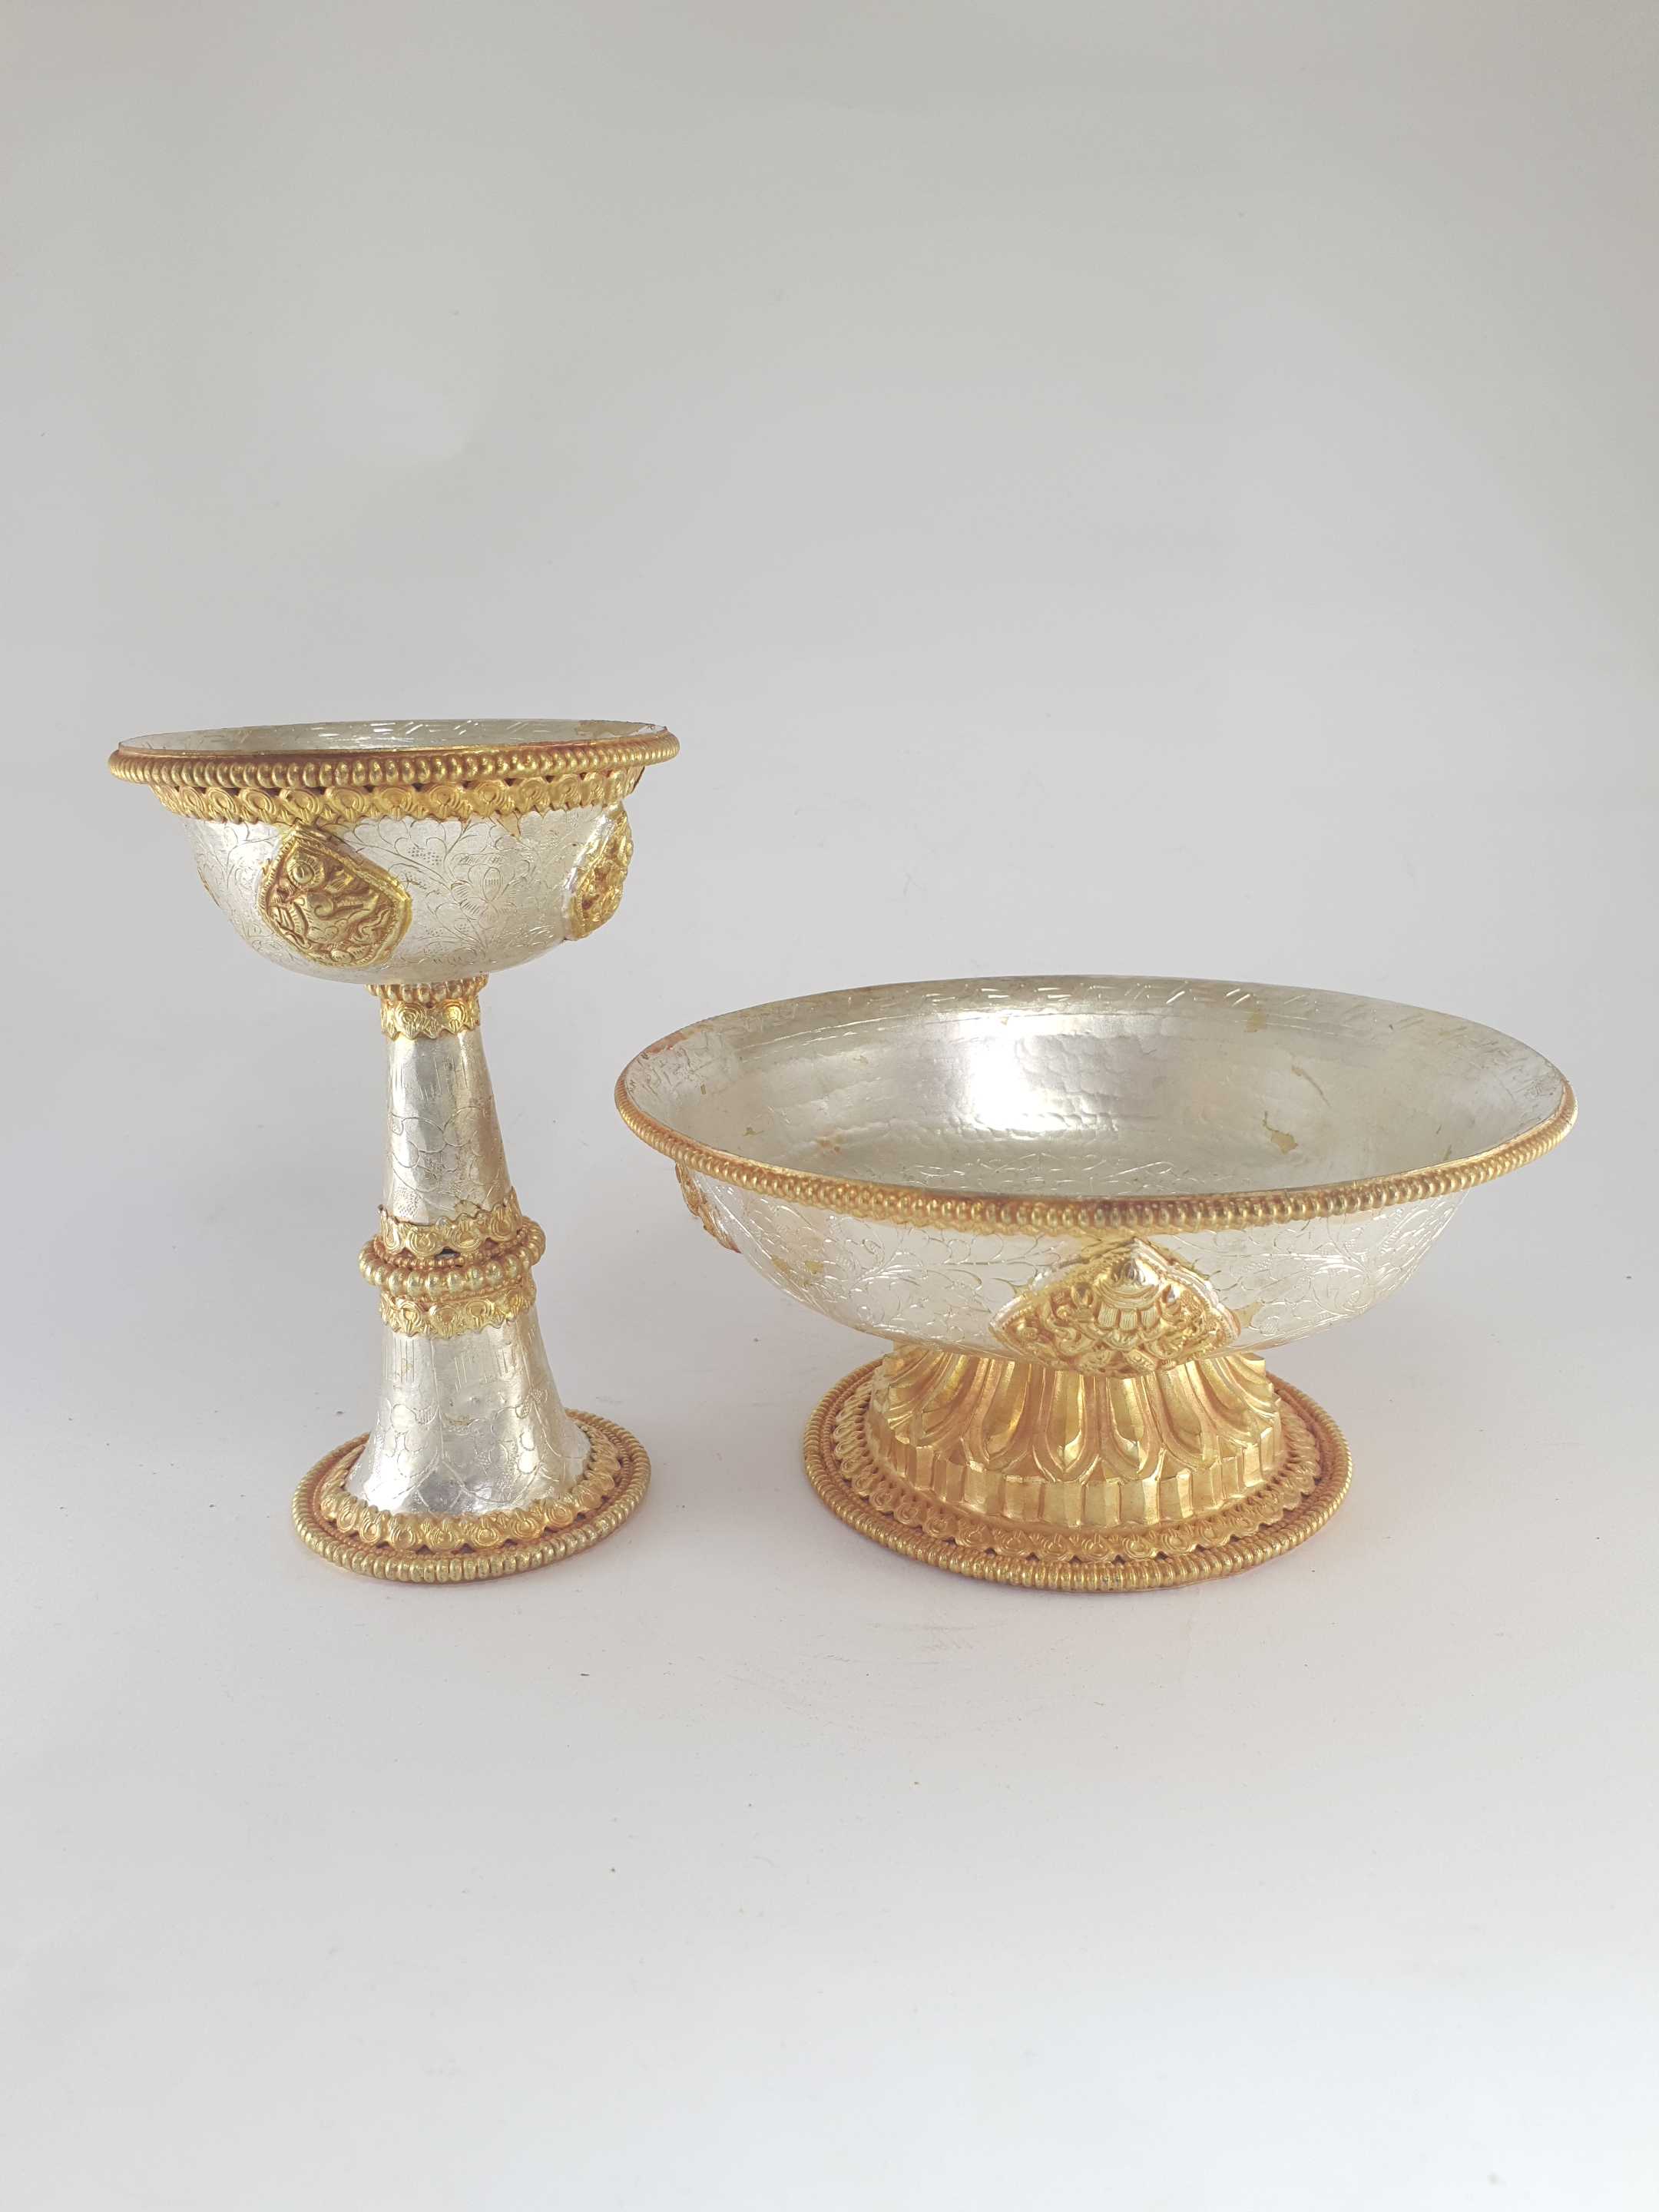 Serkyem Offering Or The Golden Drink Offering, silver And Gold Plated